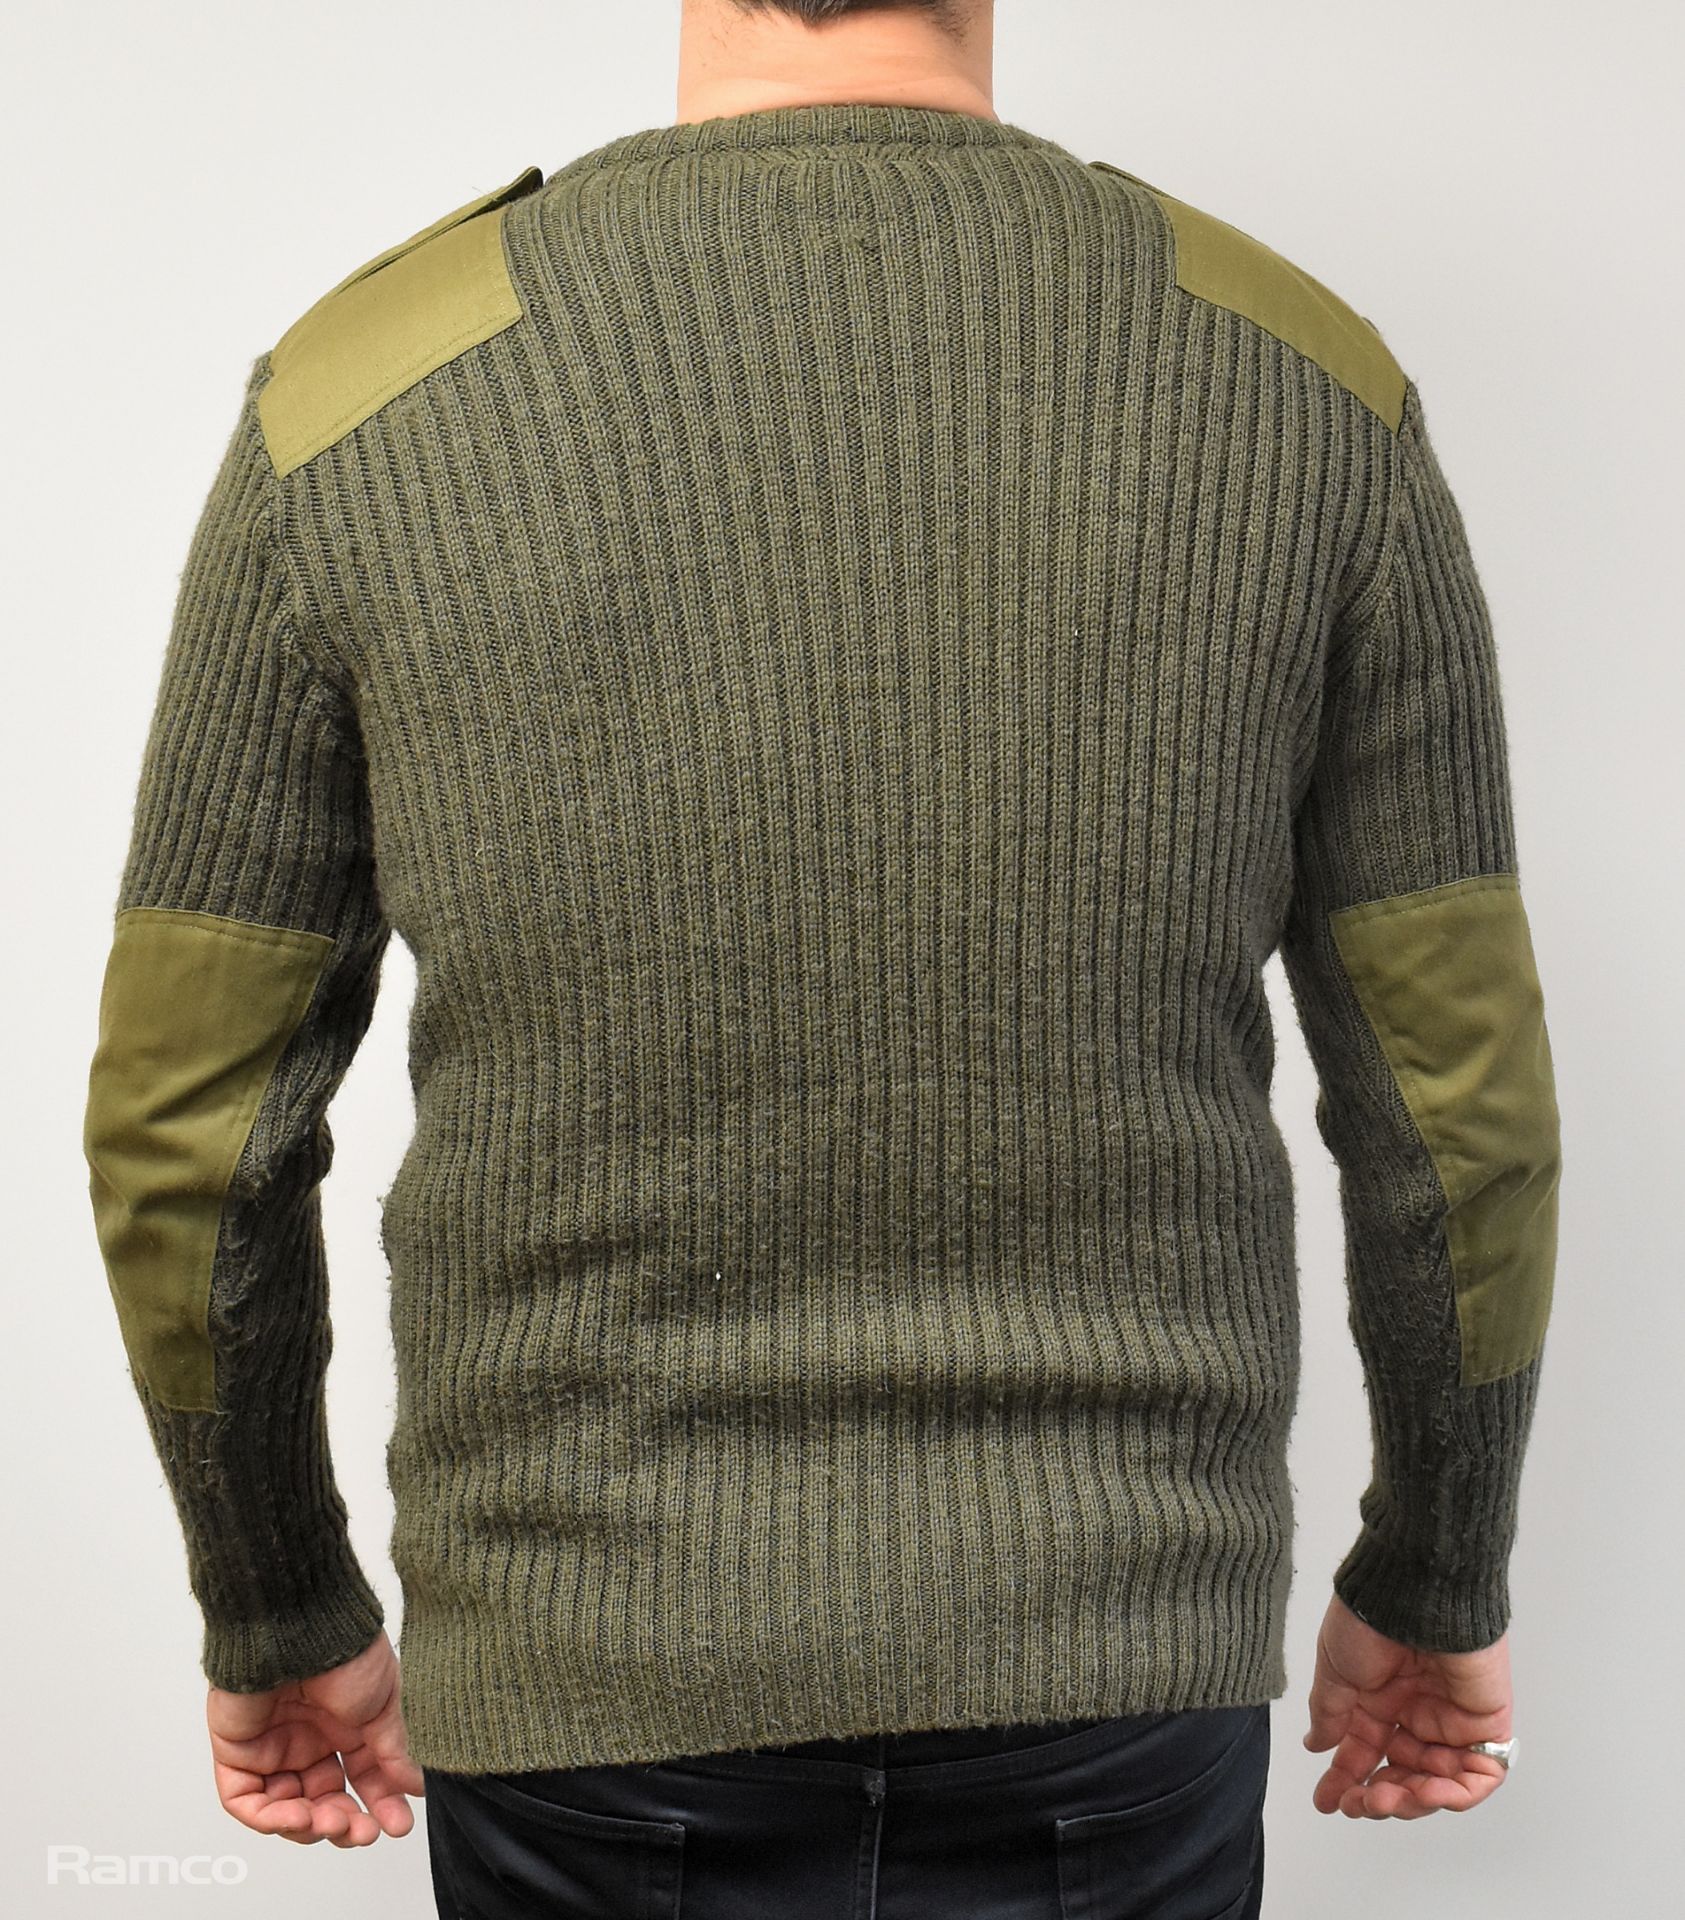 60x British Army wool jerseys - Olive - mixed grades and sizes - Image 3 of 10